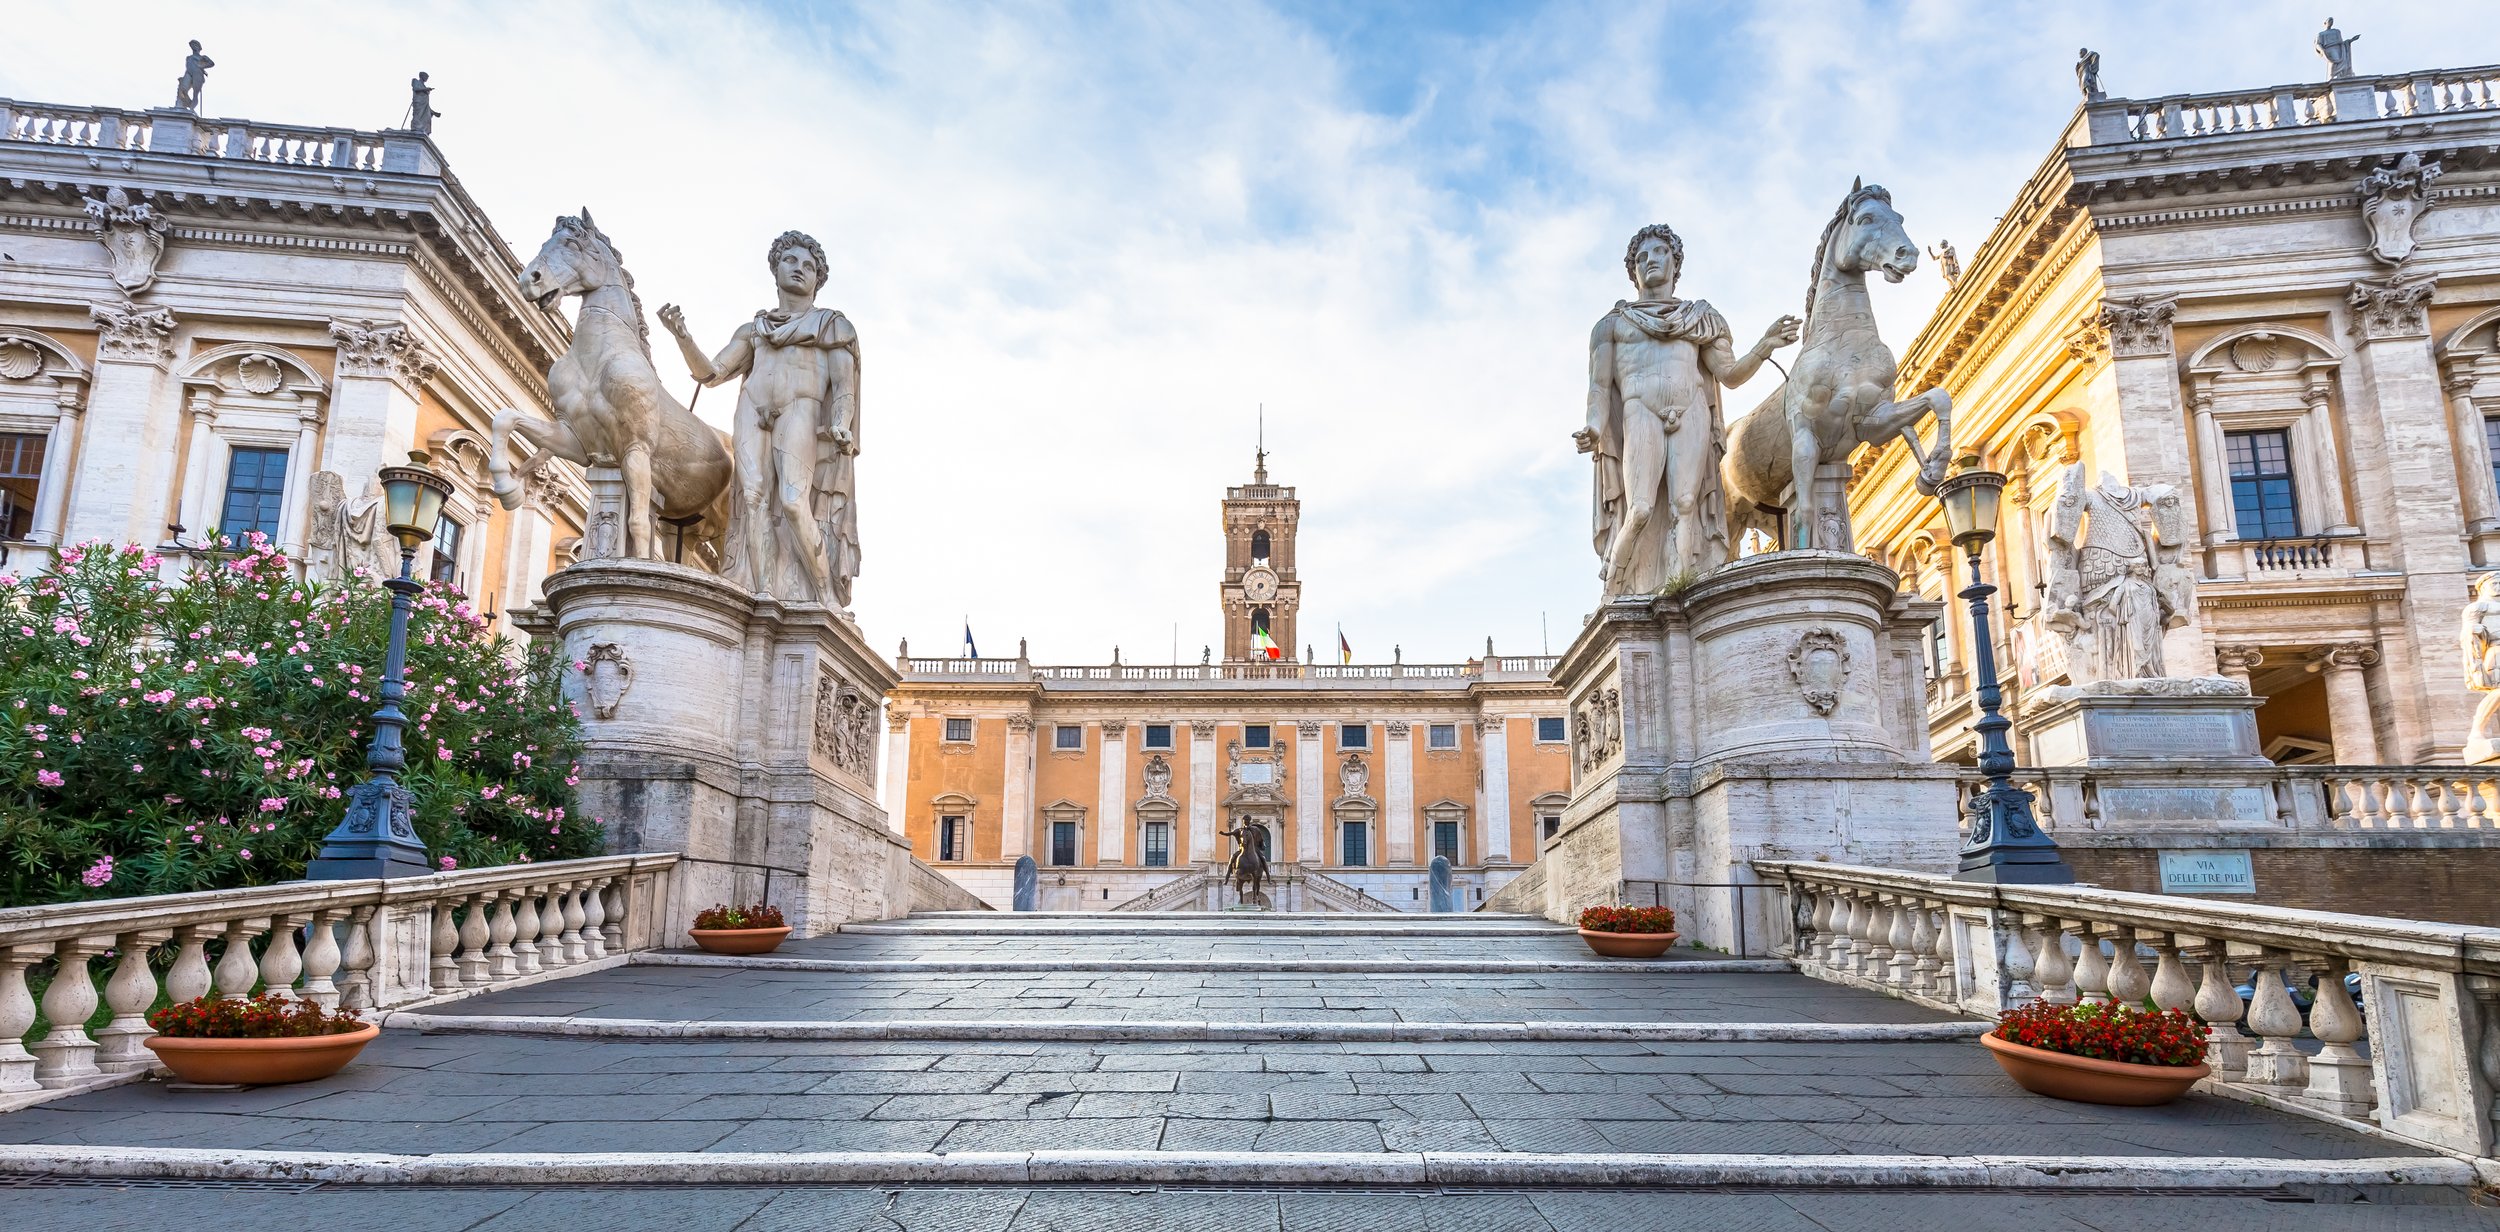 rome-italy-circa-august-2020-staircase-capitolium-square-piazza-del-campidoglio-made-by-michelangelo-it-is-home-rome-roma-city-hall-sunrise-light-before-turist-arrival.jpg